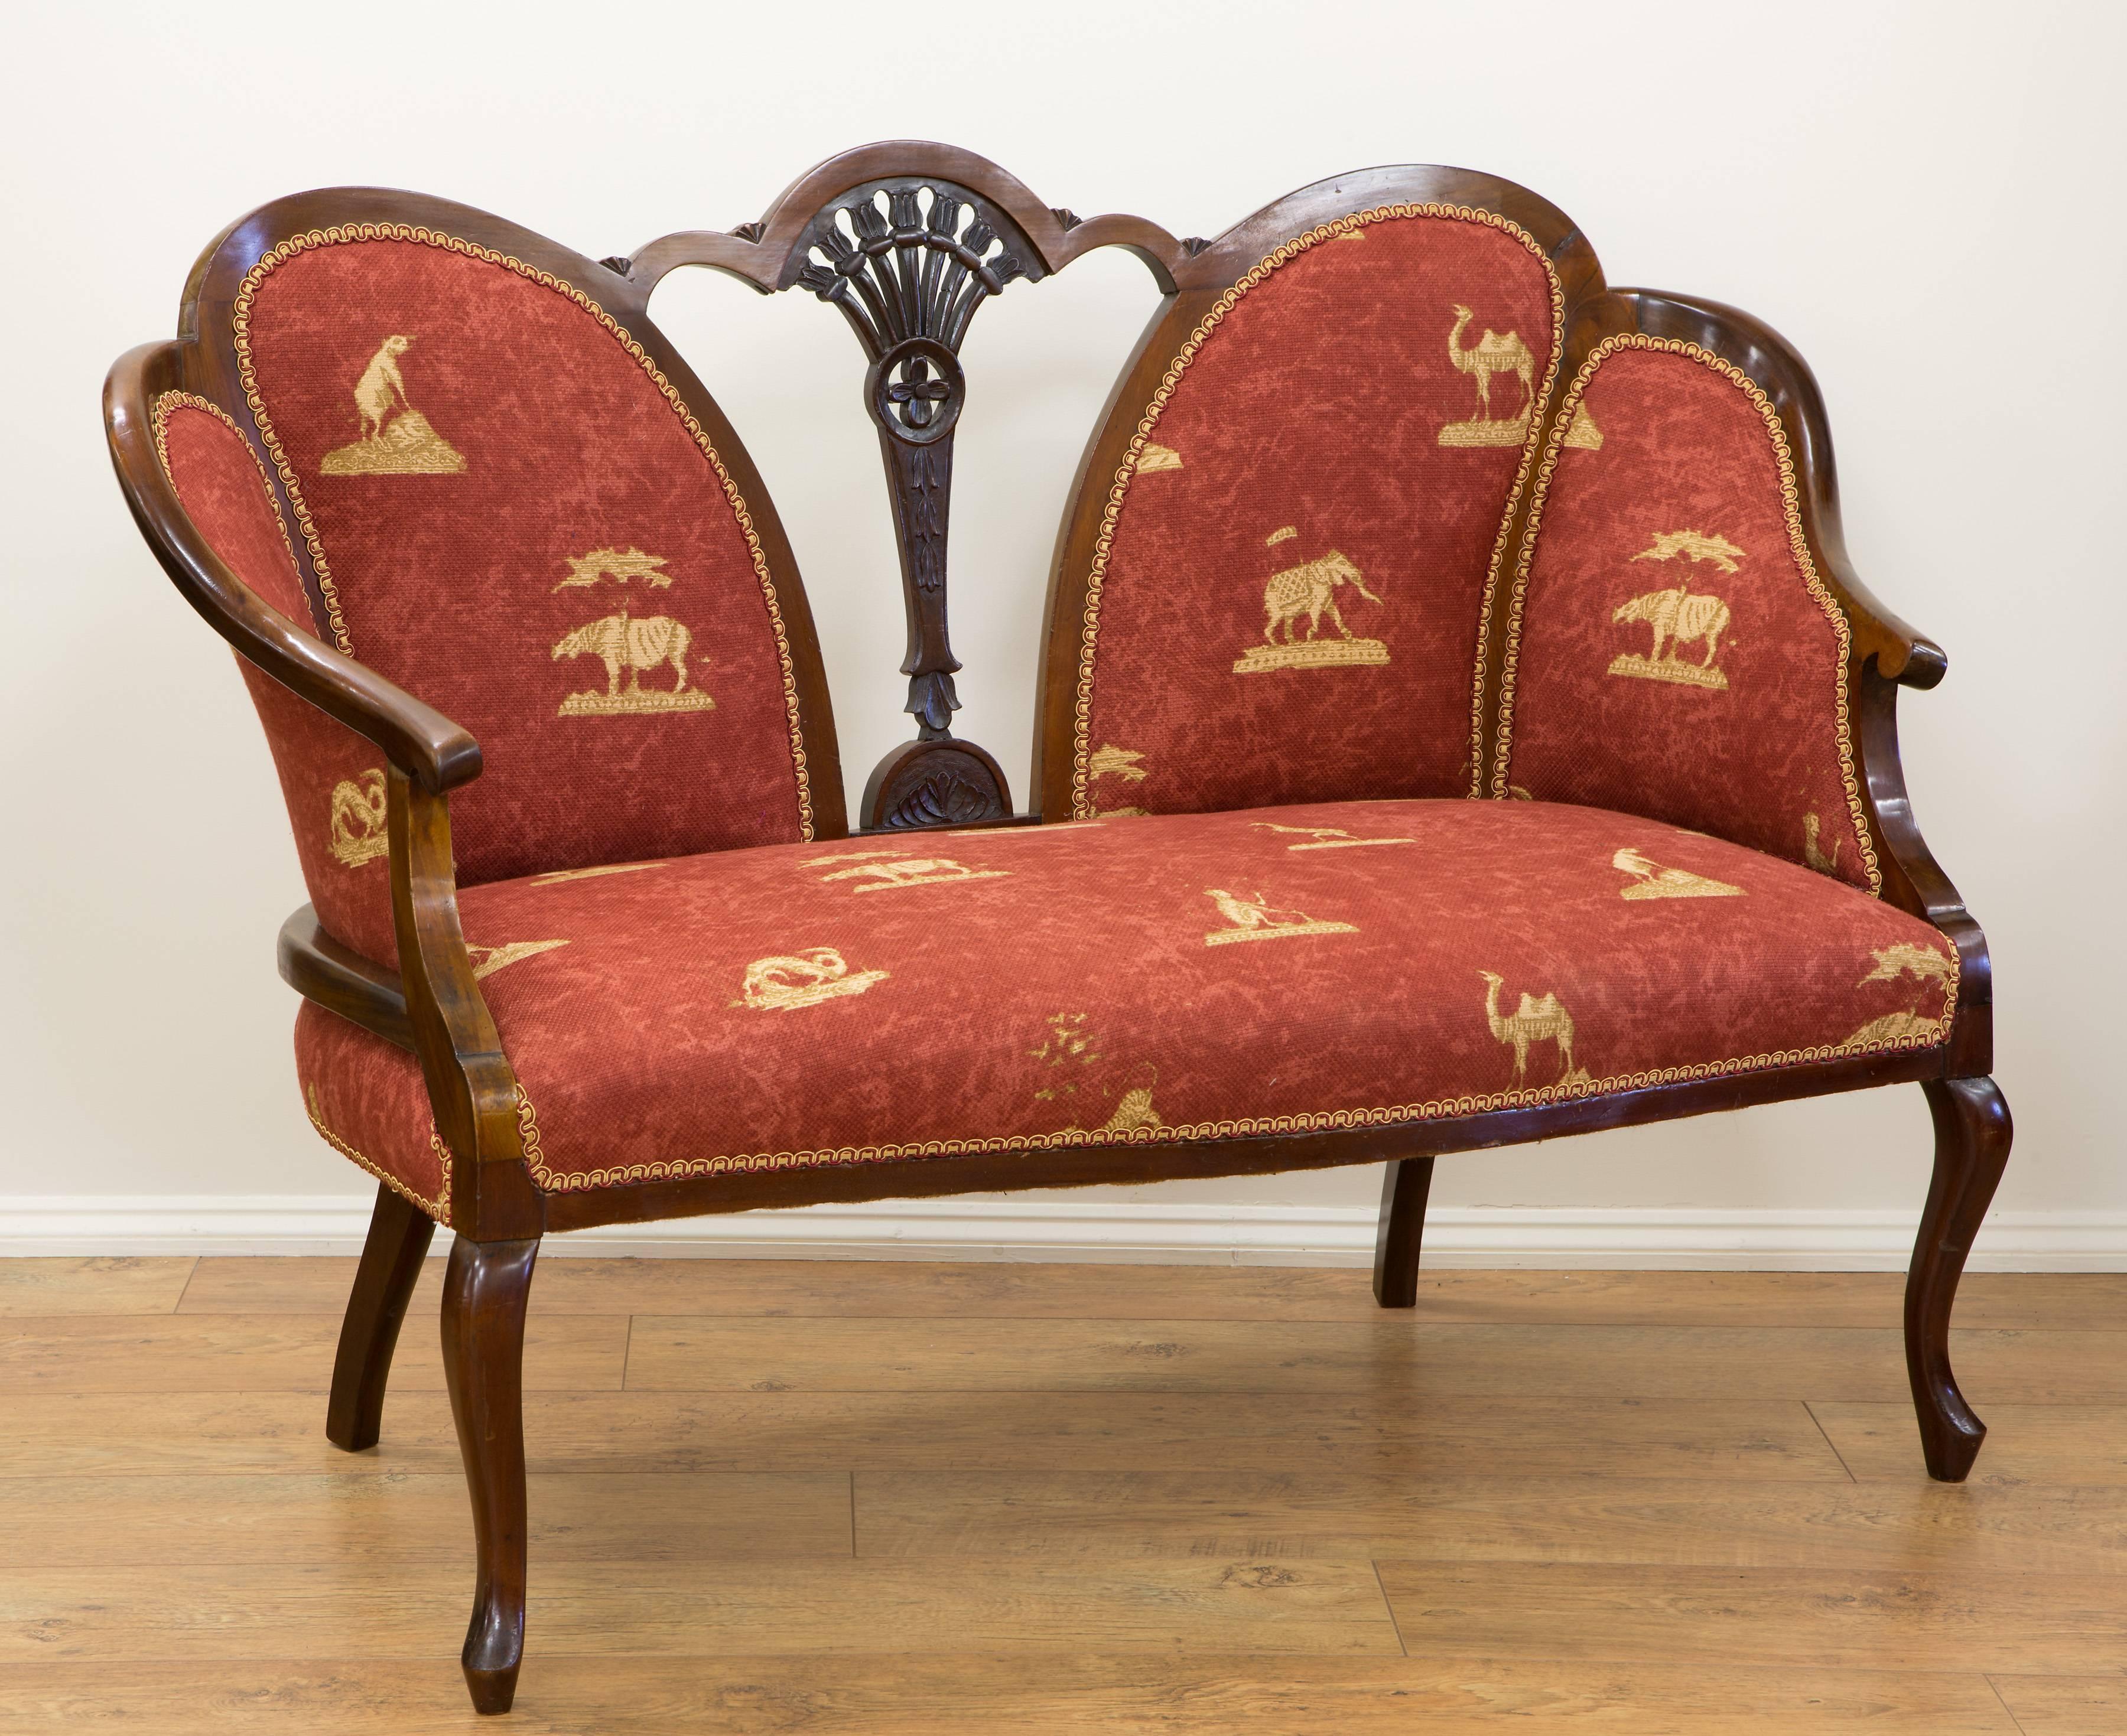 Edwardian mahogany two-seat settee with carved decoration and cabriole legs. Upholstered in red 'Livingstone' from the Atlas collection by Andrew Martin, circa 1900.